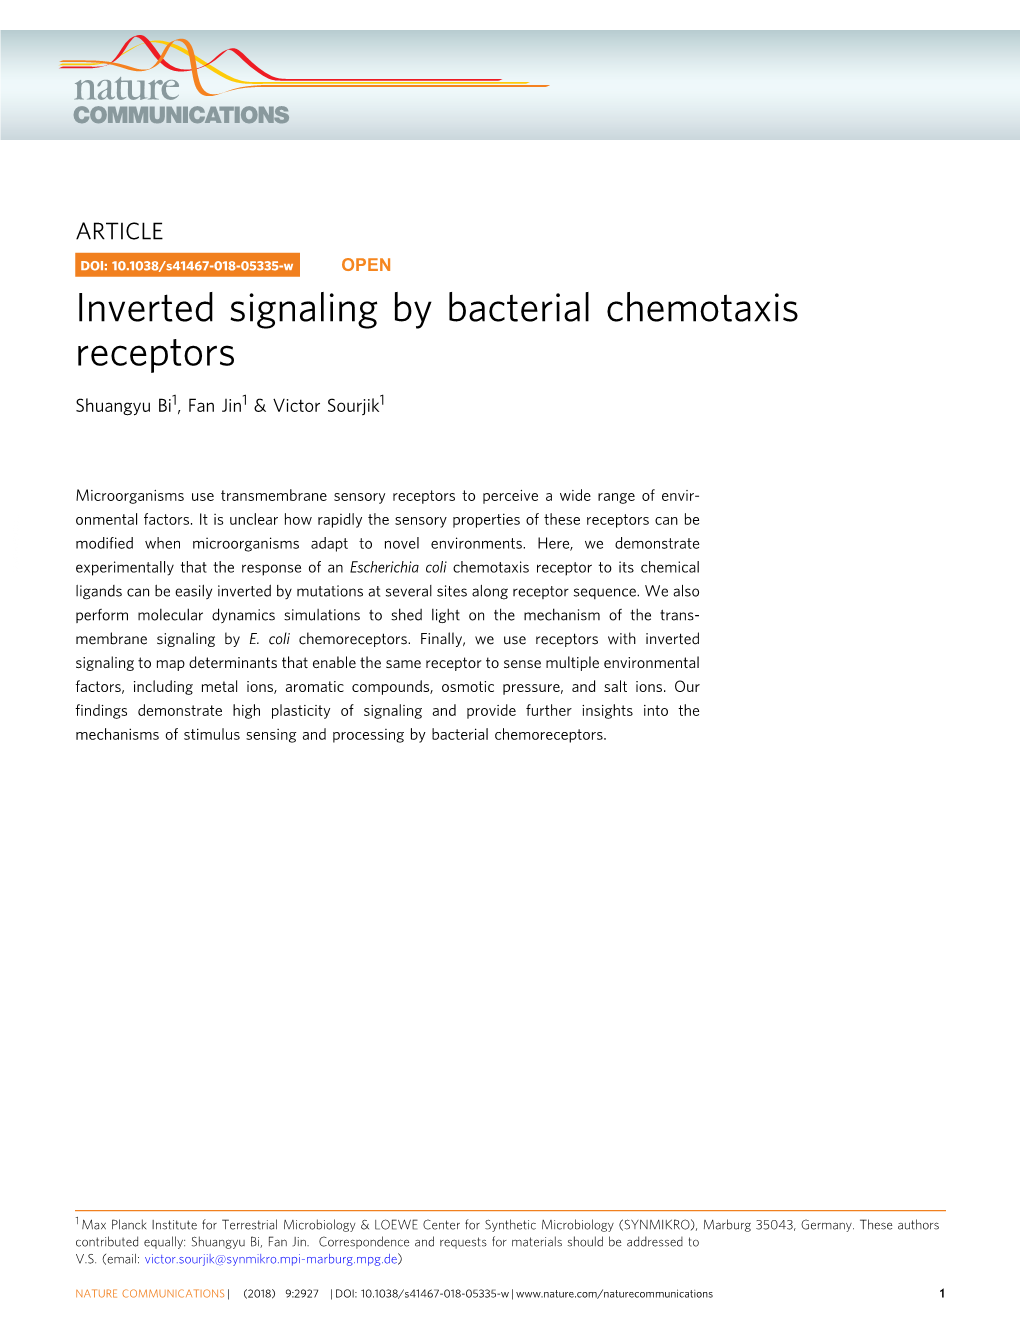 Inverted Signaling by Bacterial Chemotaxis Receptors